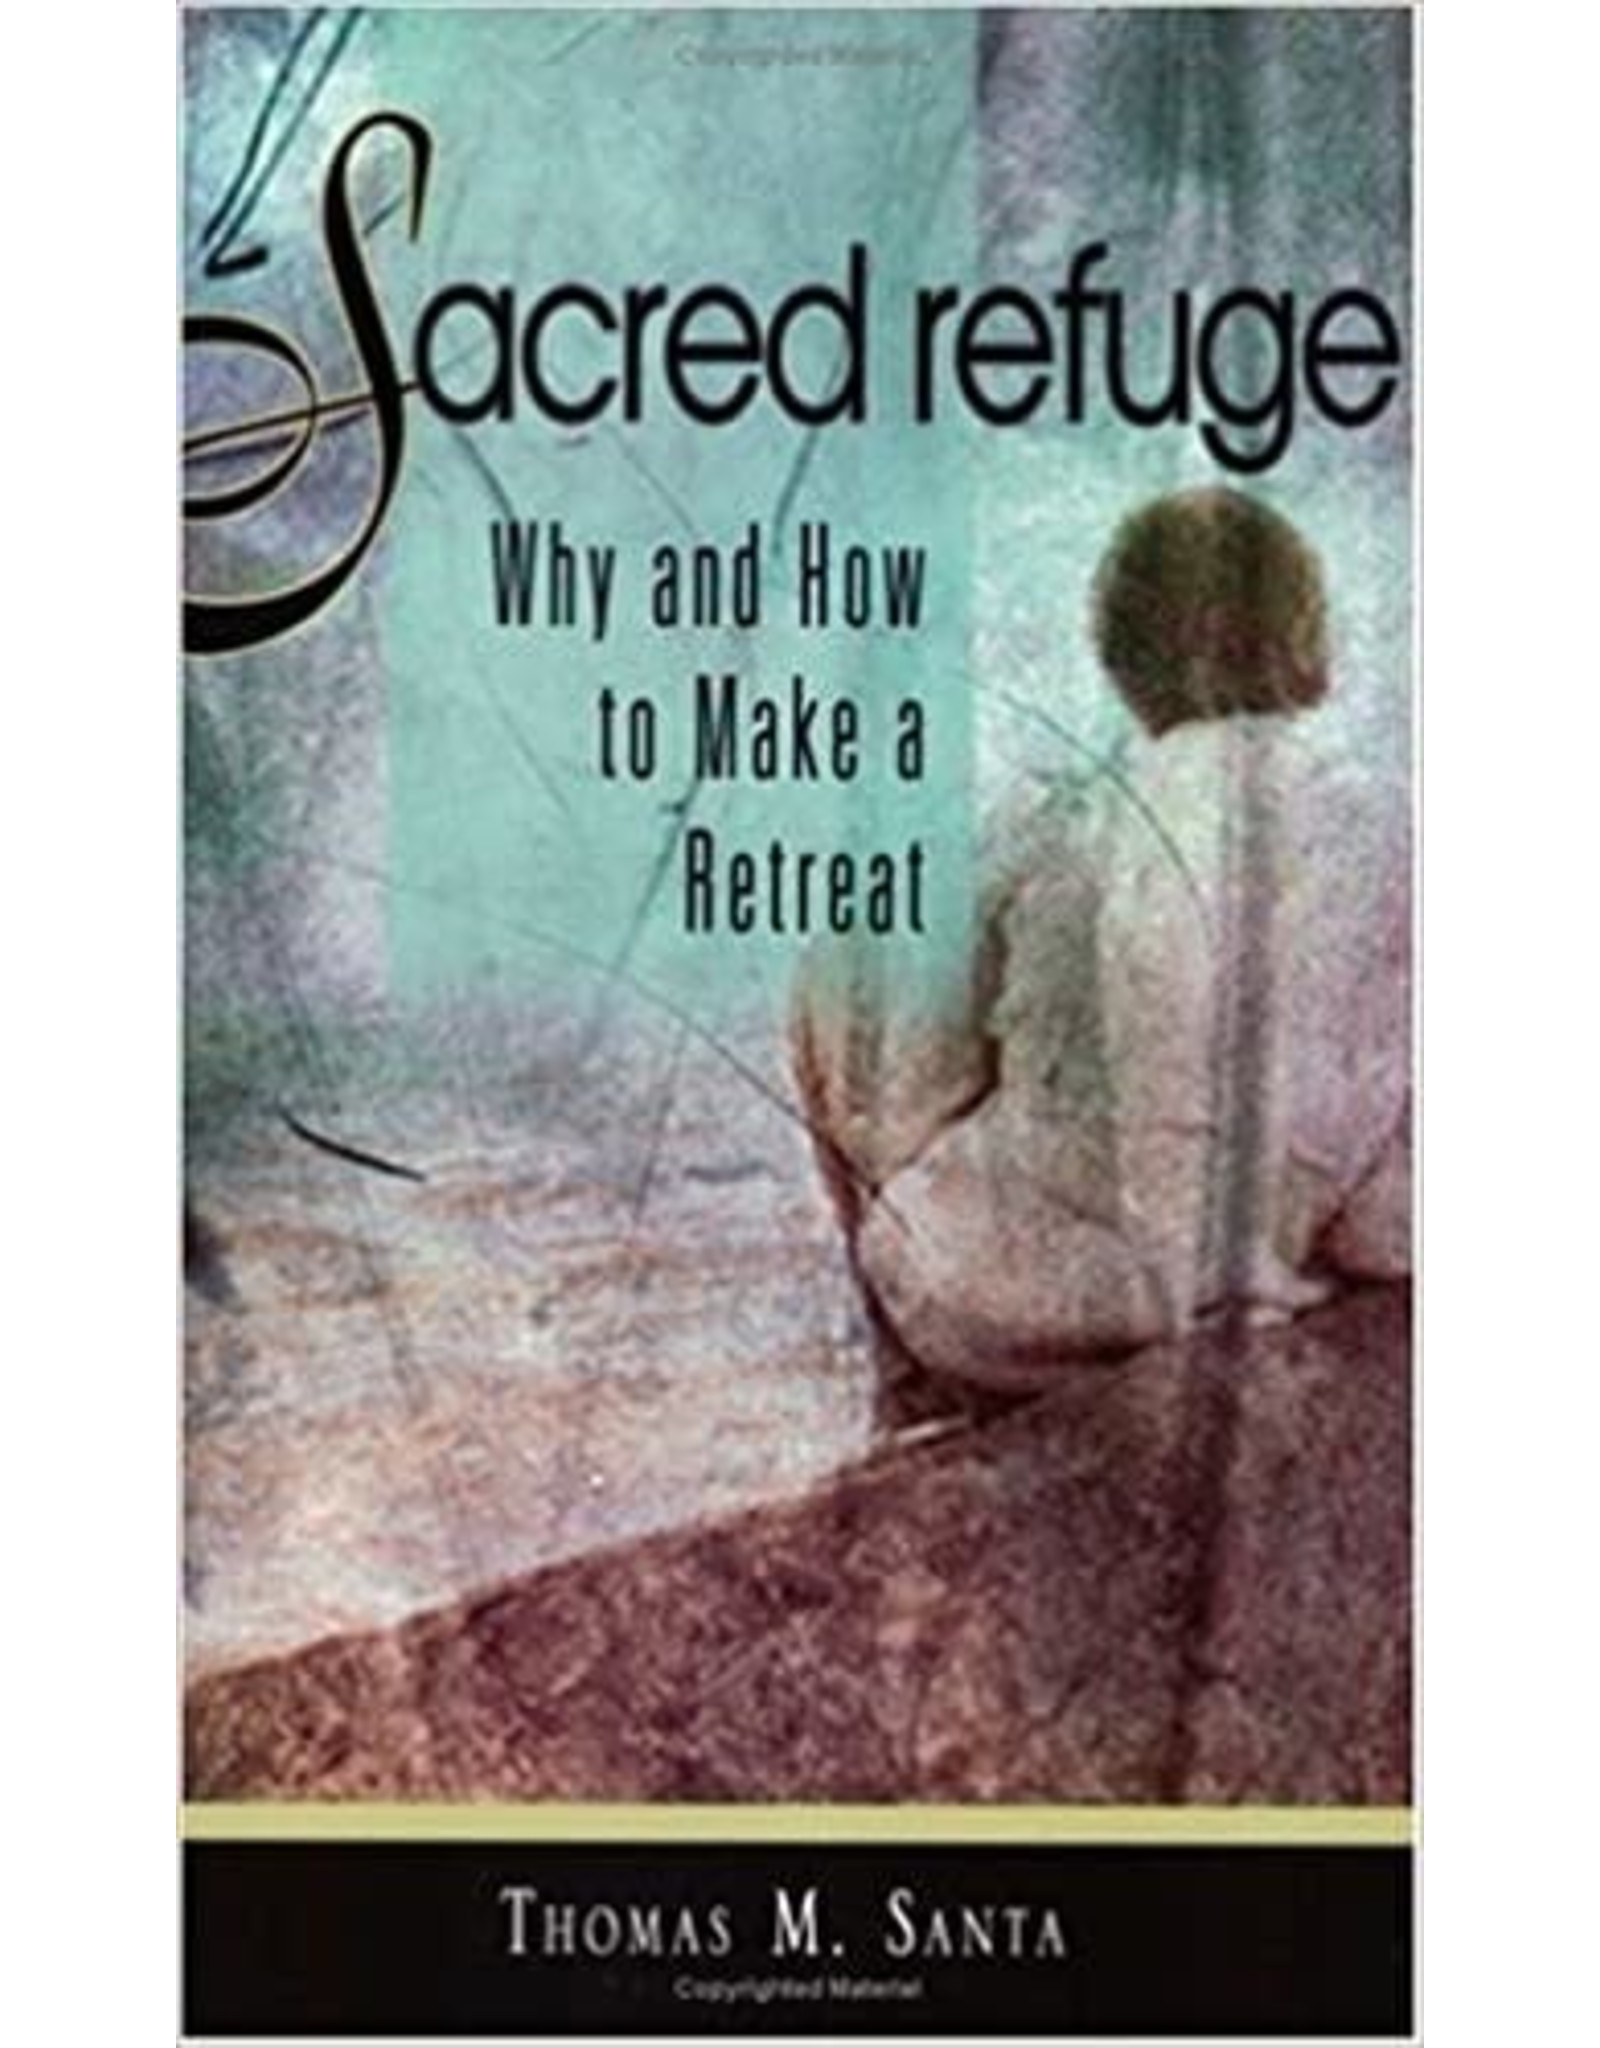 Ave Maria Sacred Refuge: Why and How to Make a Retreat